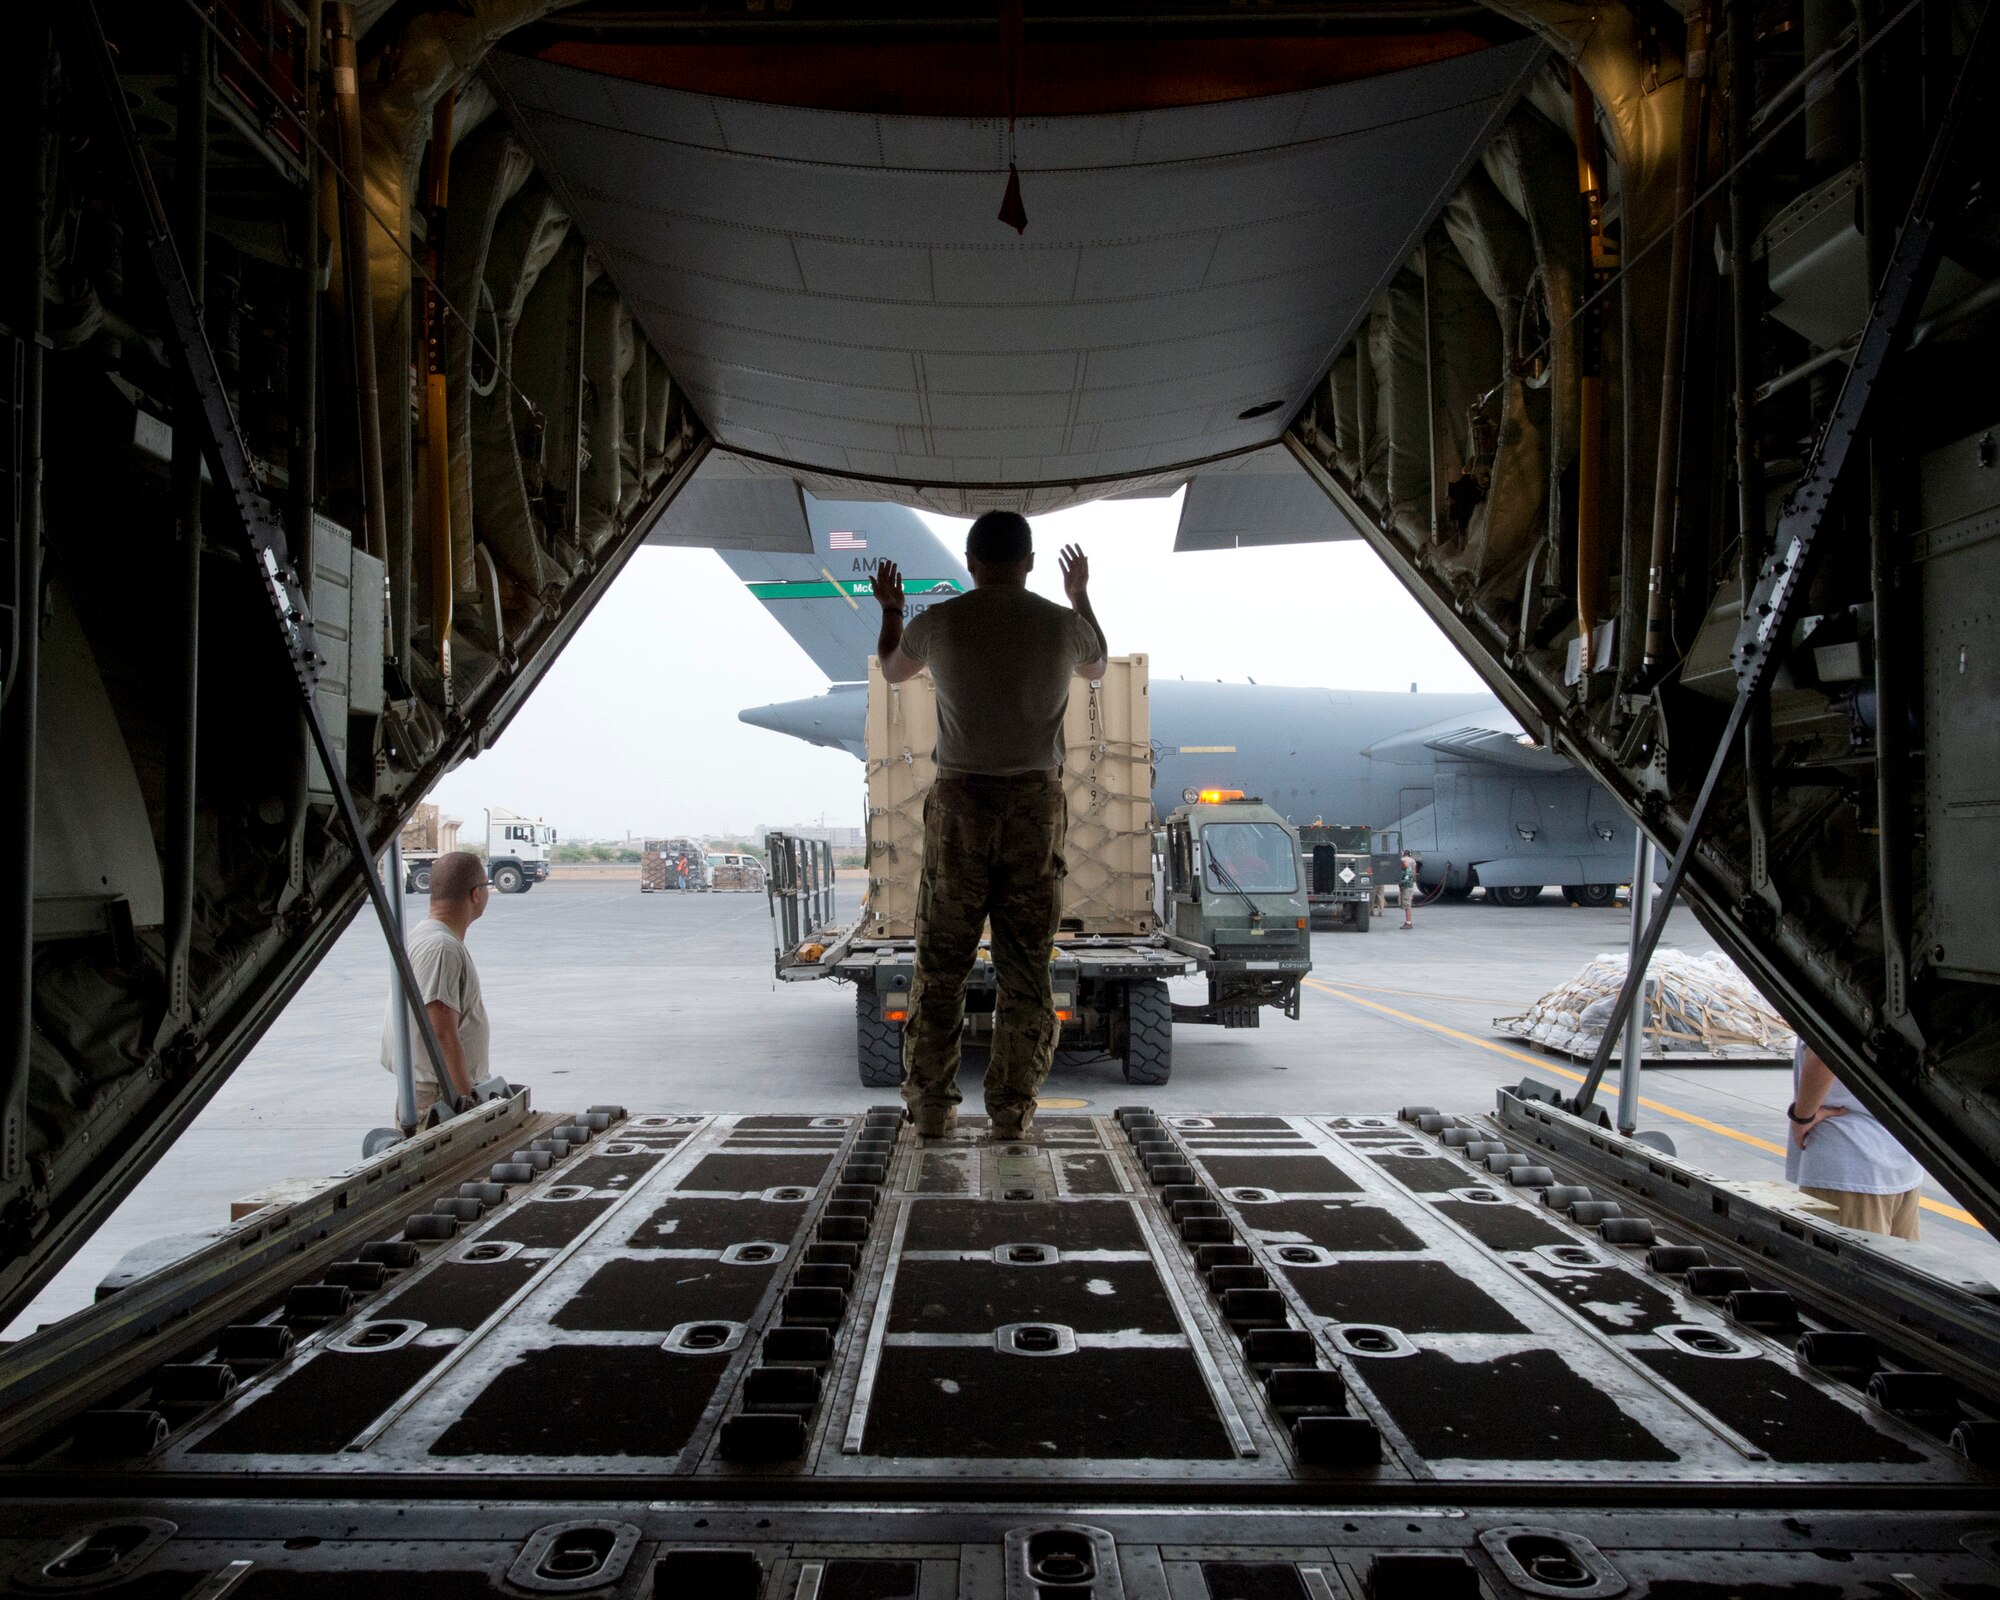 Senior Airman Dan Cabanas, 75th Expeditionary Airlift Squadron, directs the movement of cargo onto the C-130J June 11, 2014 at Camp Lemonnier, Djibouti. The C-130J crew was transporting personnel and equipment in support of Combined Joint Task Force-Horn of Africa's mission of stabilizing and strengthening security in East Africa. (U.S. Air Force photo by Staff Sgt. Leslie Keopka)